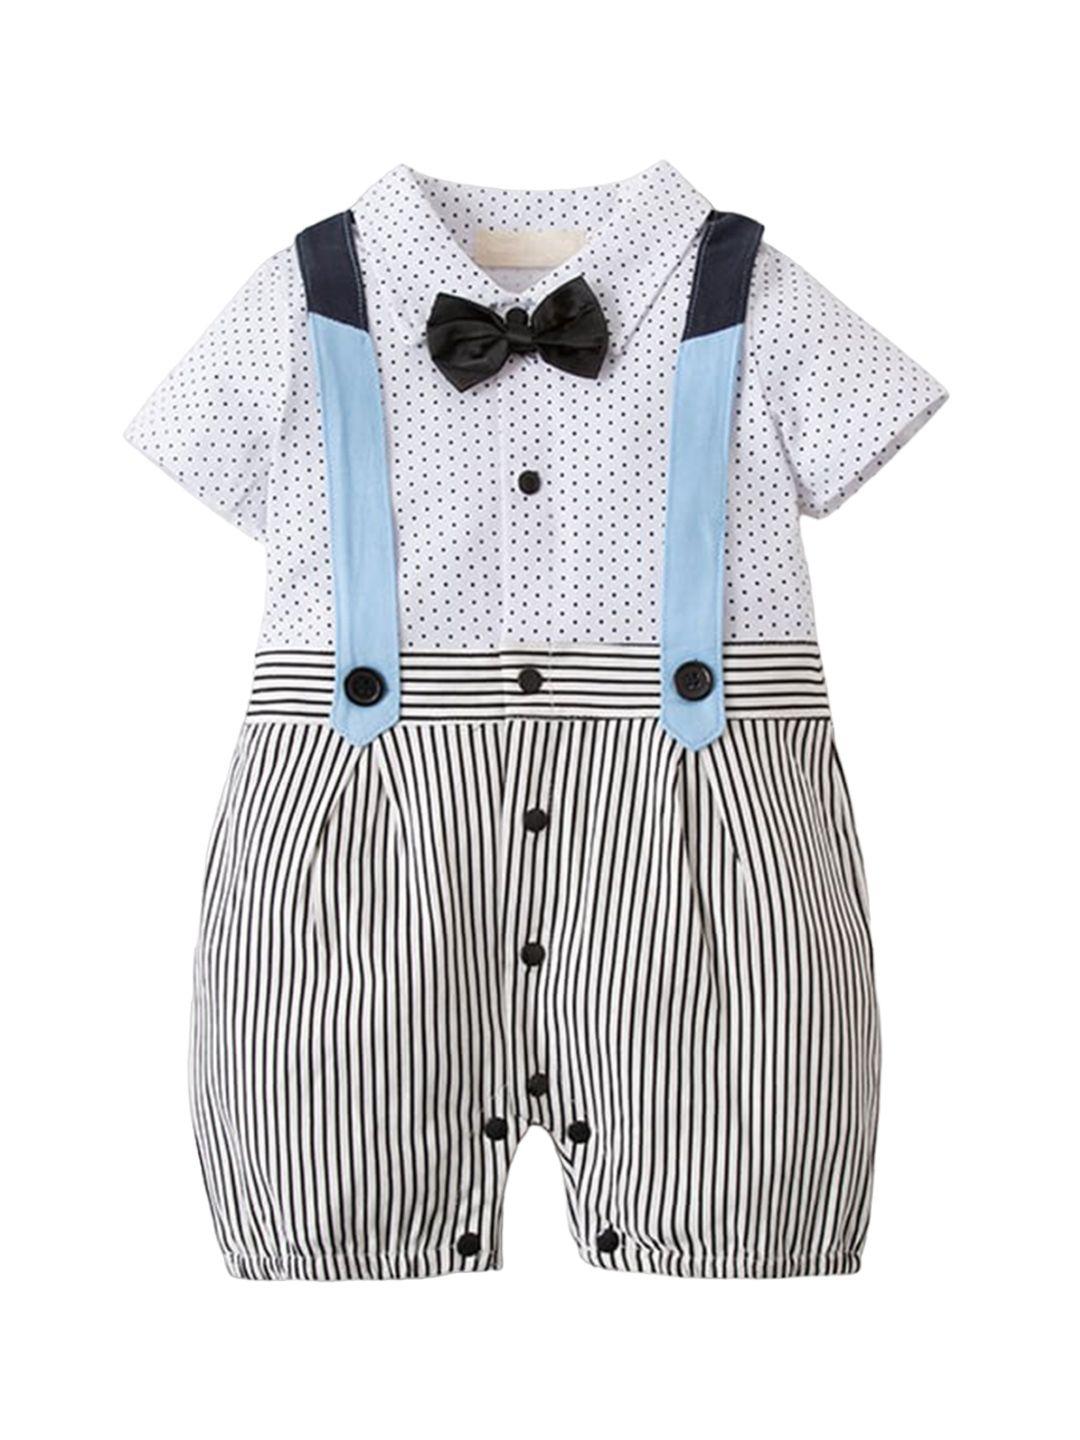 stylecast-infant-boys-black-&-white-striped-cotton-rompers